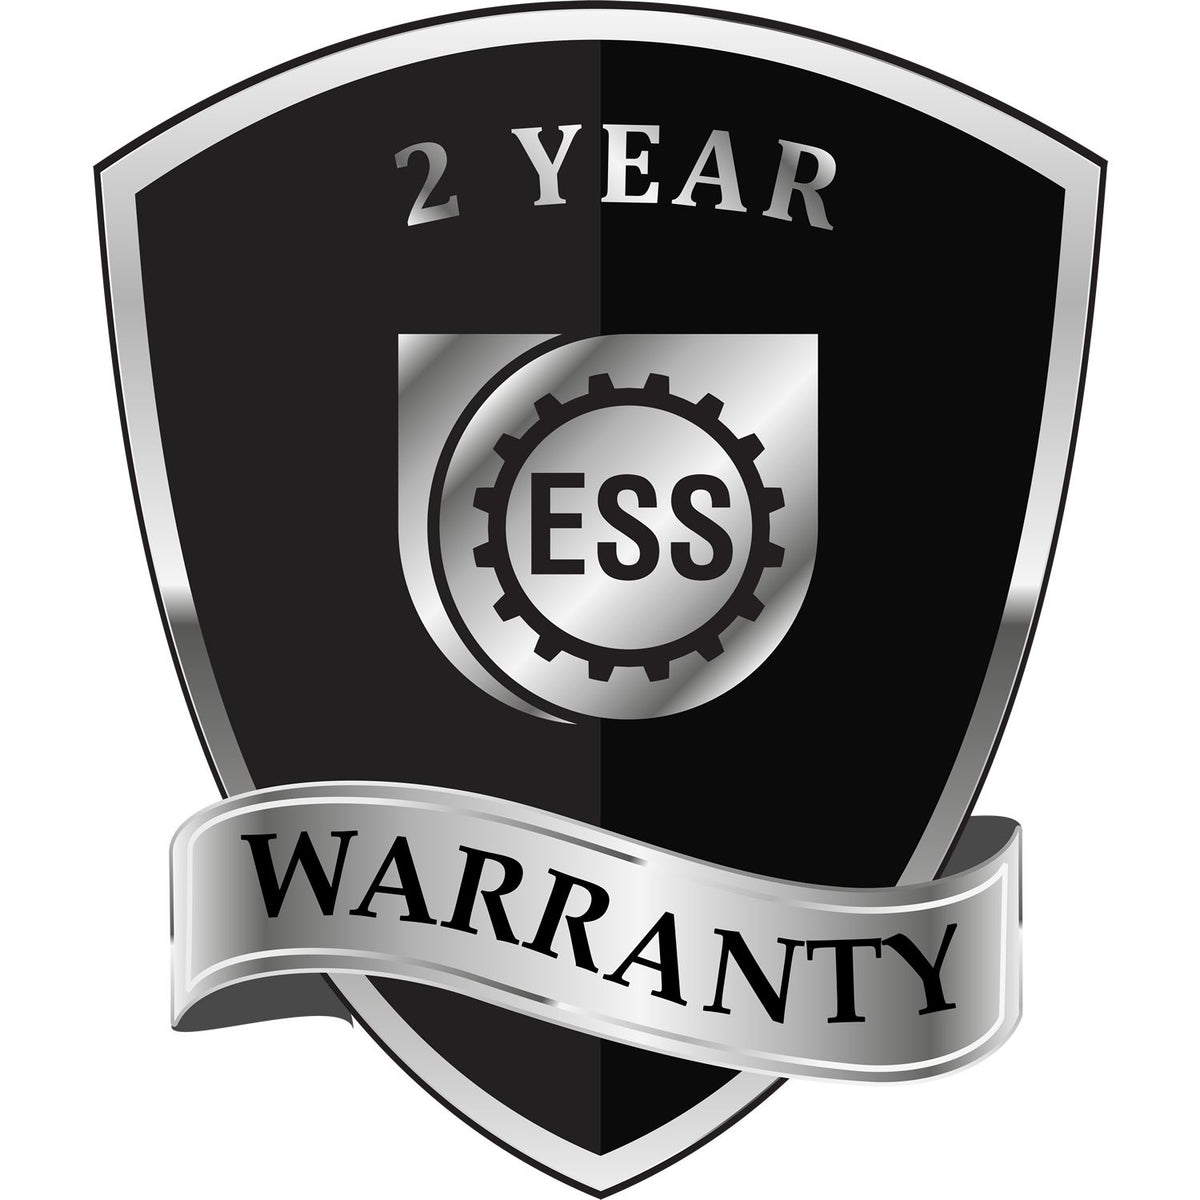 A black and silver badge or emblem showing warranty information for the Hybrid Utah Engineer Seal